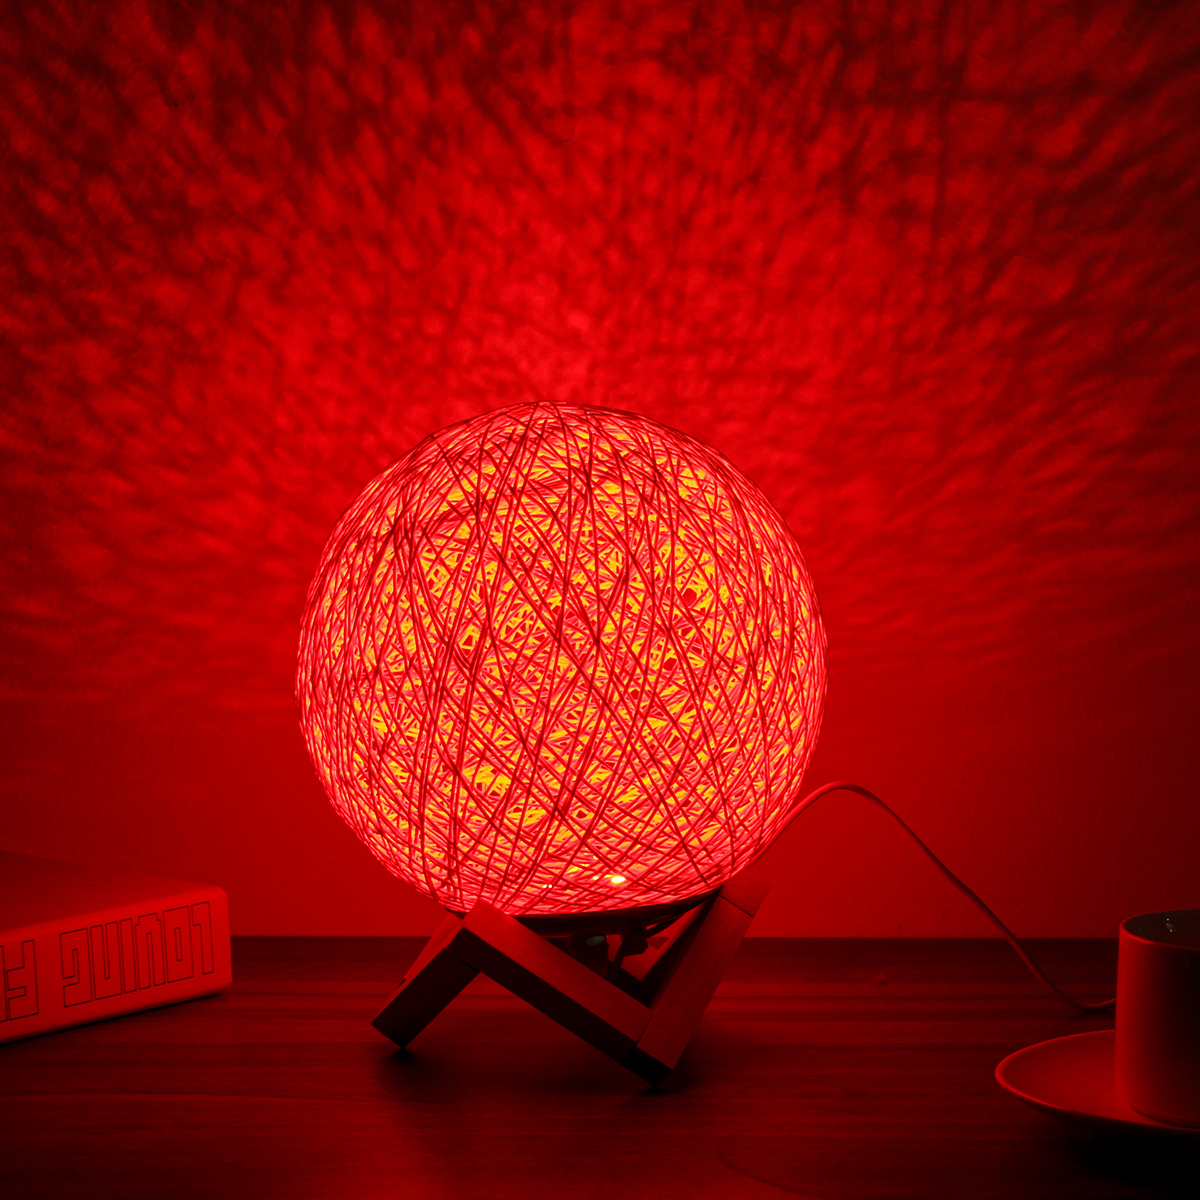 USB-Wooden-Rattan-Table-Light-Dimming-Desk-Bedroom-Night-LED-Ball-Home-Decorations-1627078-4